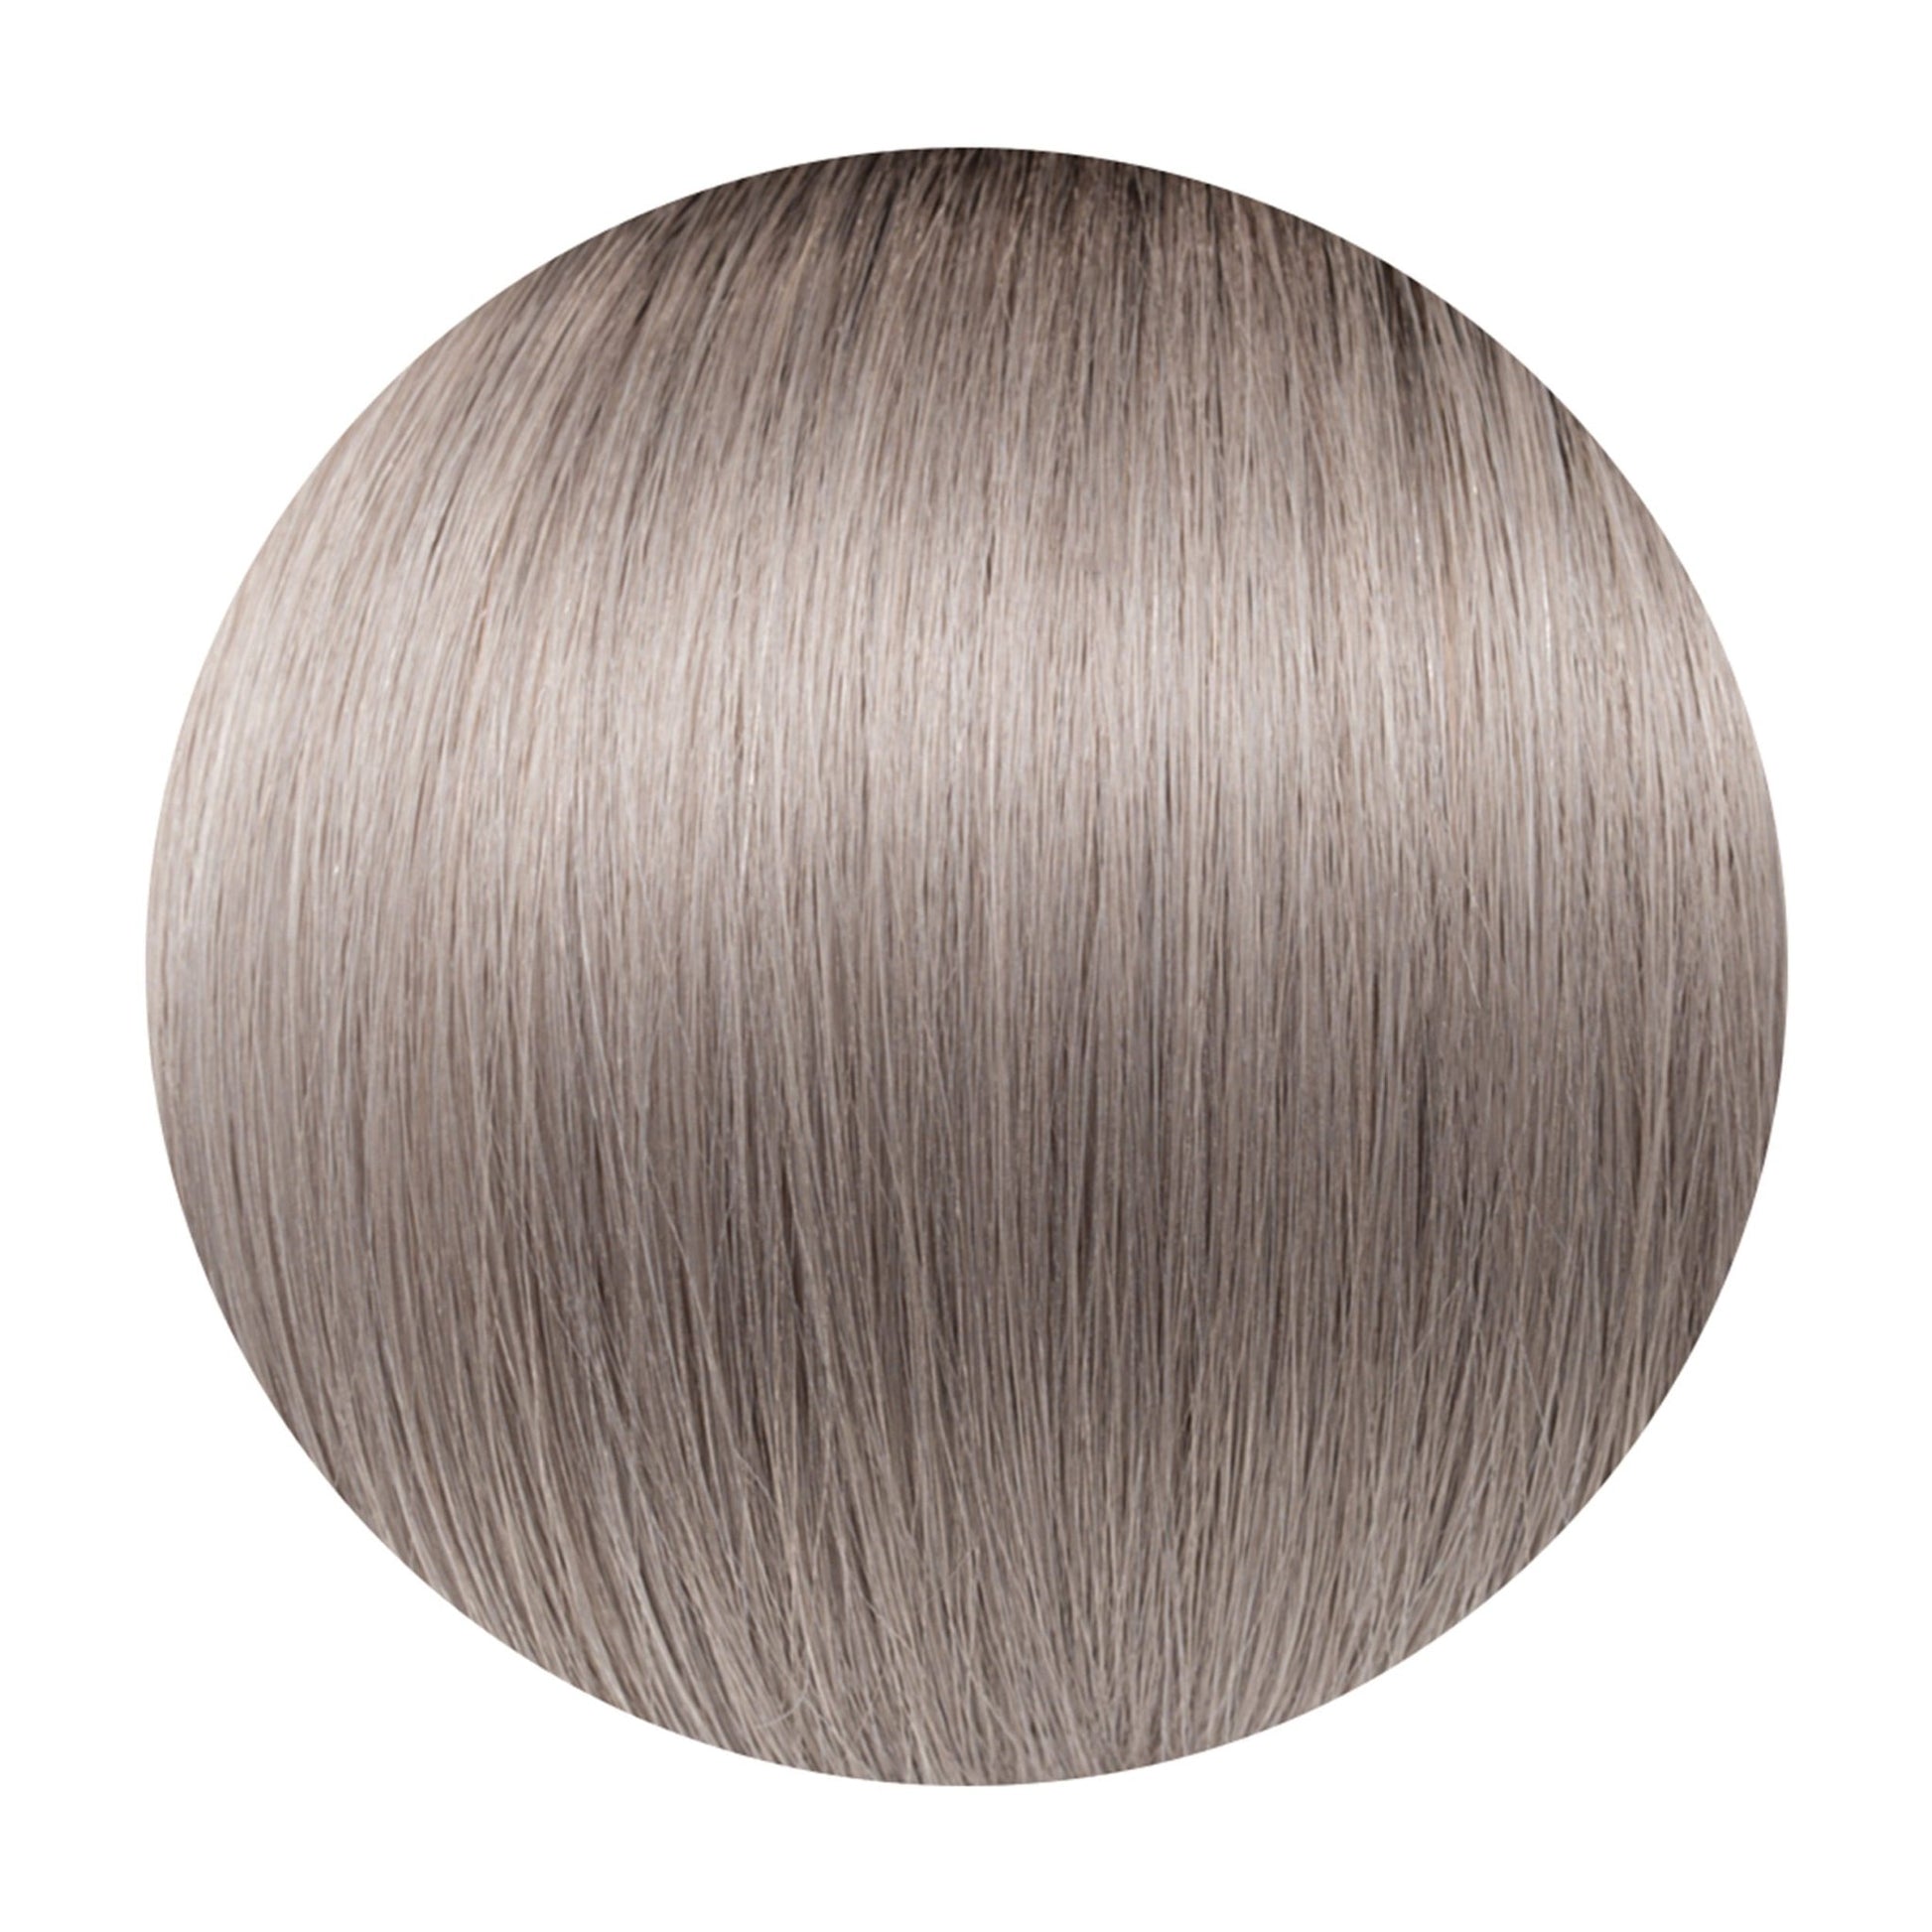 Seamless1 Salt n Pepper Balayage Colour Human Hair in 5 Piece - shelley and co